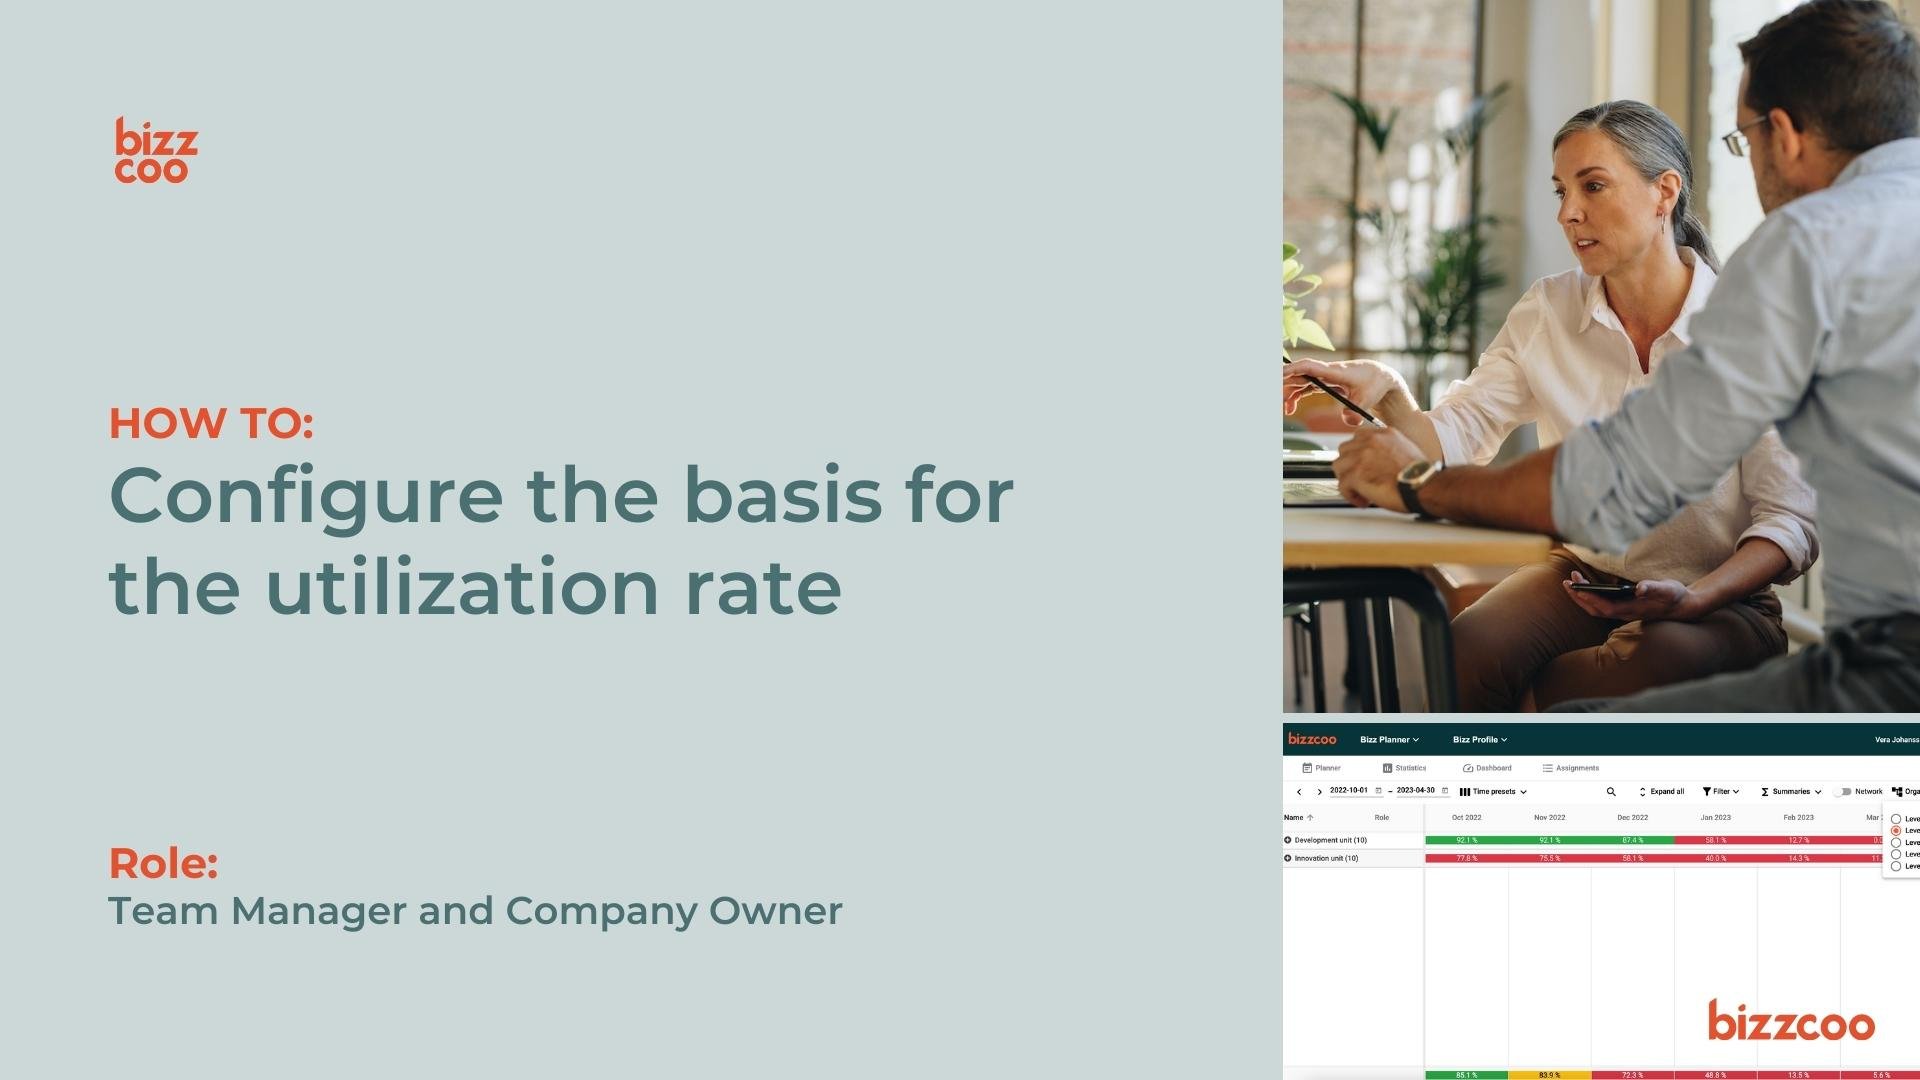 How to configure the basis for the utilization rate